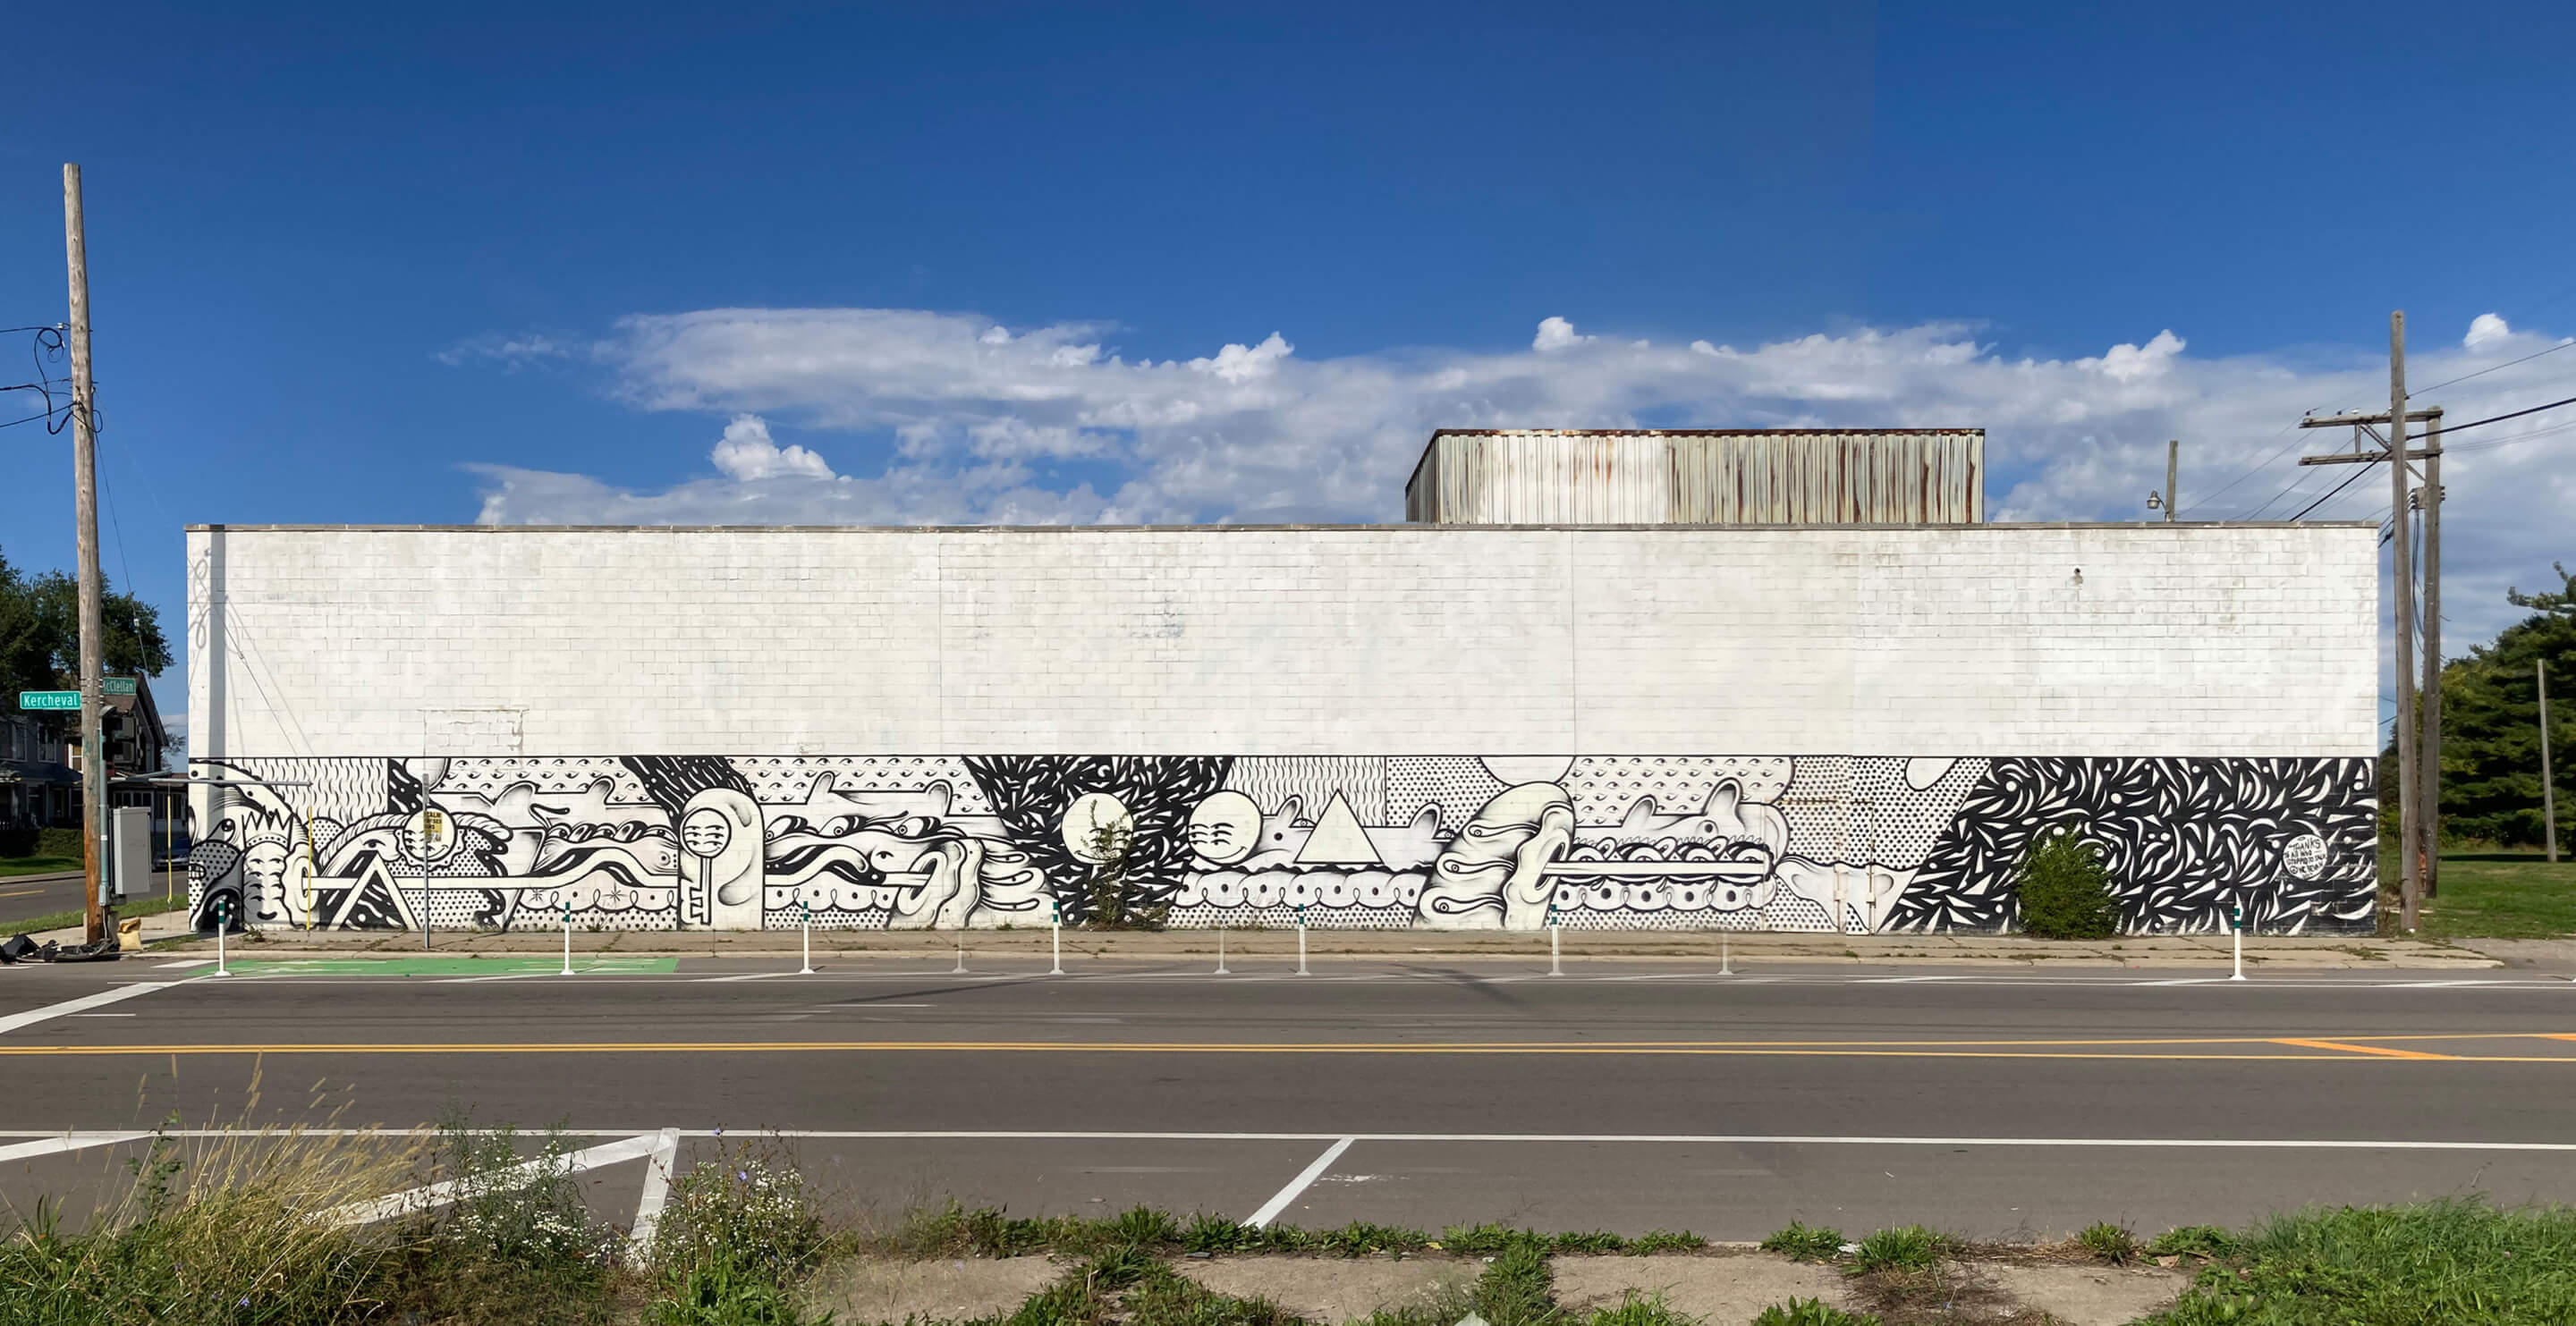 facade of a long warehouse building with concrete walls and graffiti 